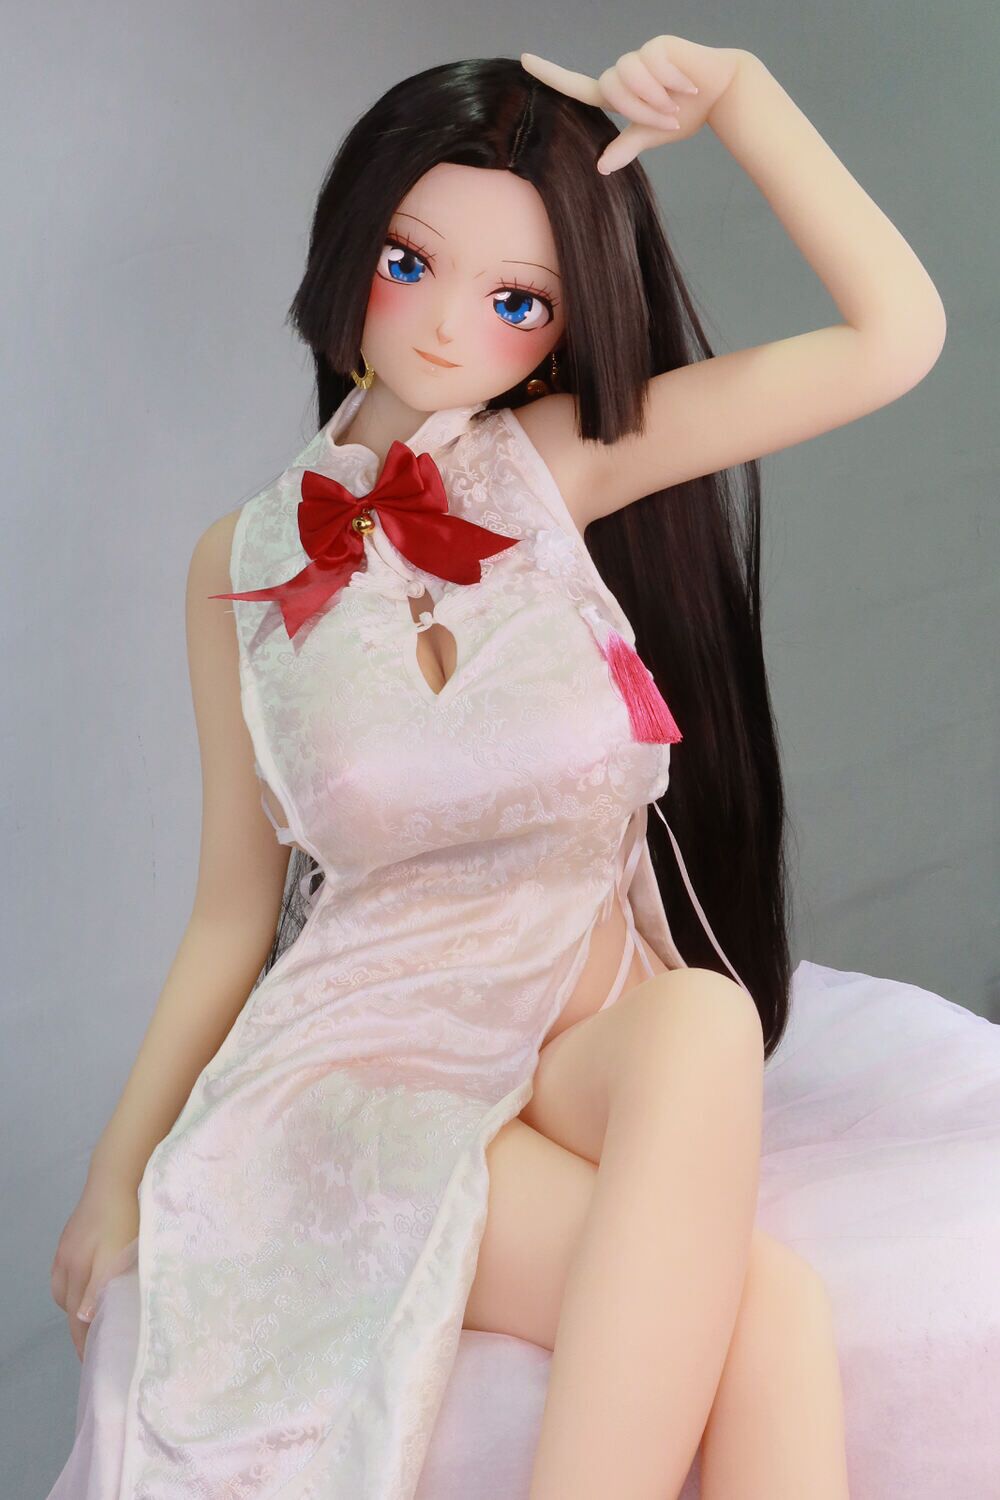 Aotume Anime TPE Sex Doll - Ella Cook at rosemarydoll